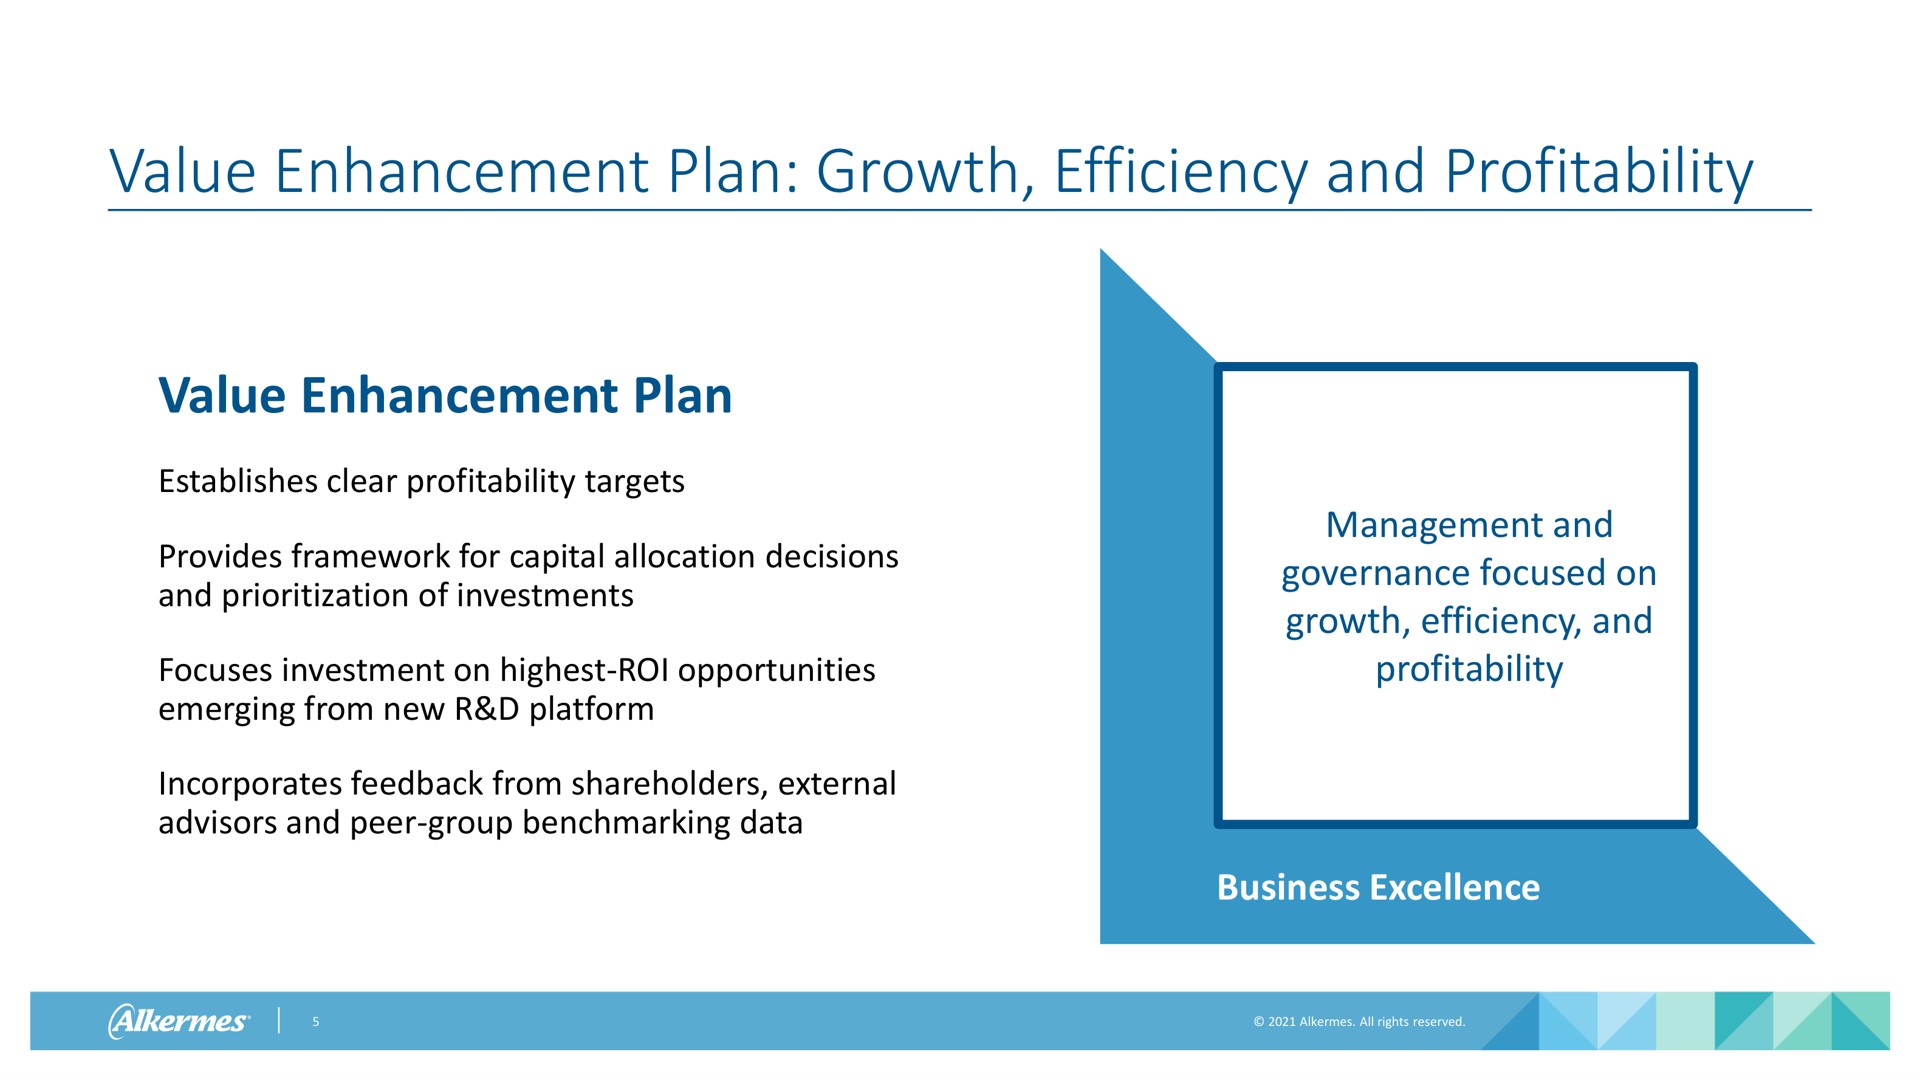 value enhancement plan growth efficiency and profitability value enhancement plan establishes clear profitability targets provides framework for capital allocation decisions and of investments focuses investment on highest roi opportunities emerging from new platform incorporates feedback from shareholders external advisors and peer group data management and governance focused on growth efficiency and profitability business excellence | Alkermes